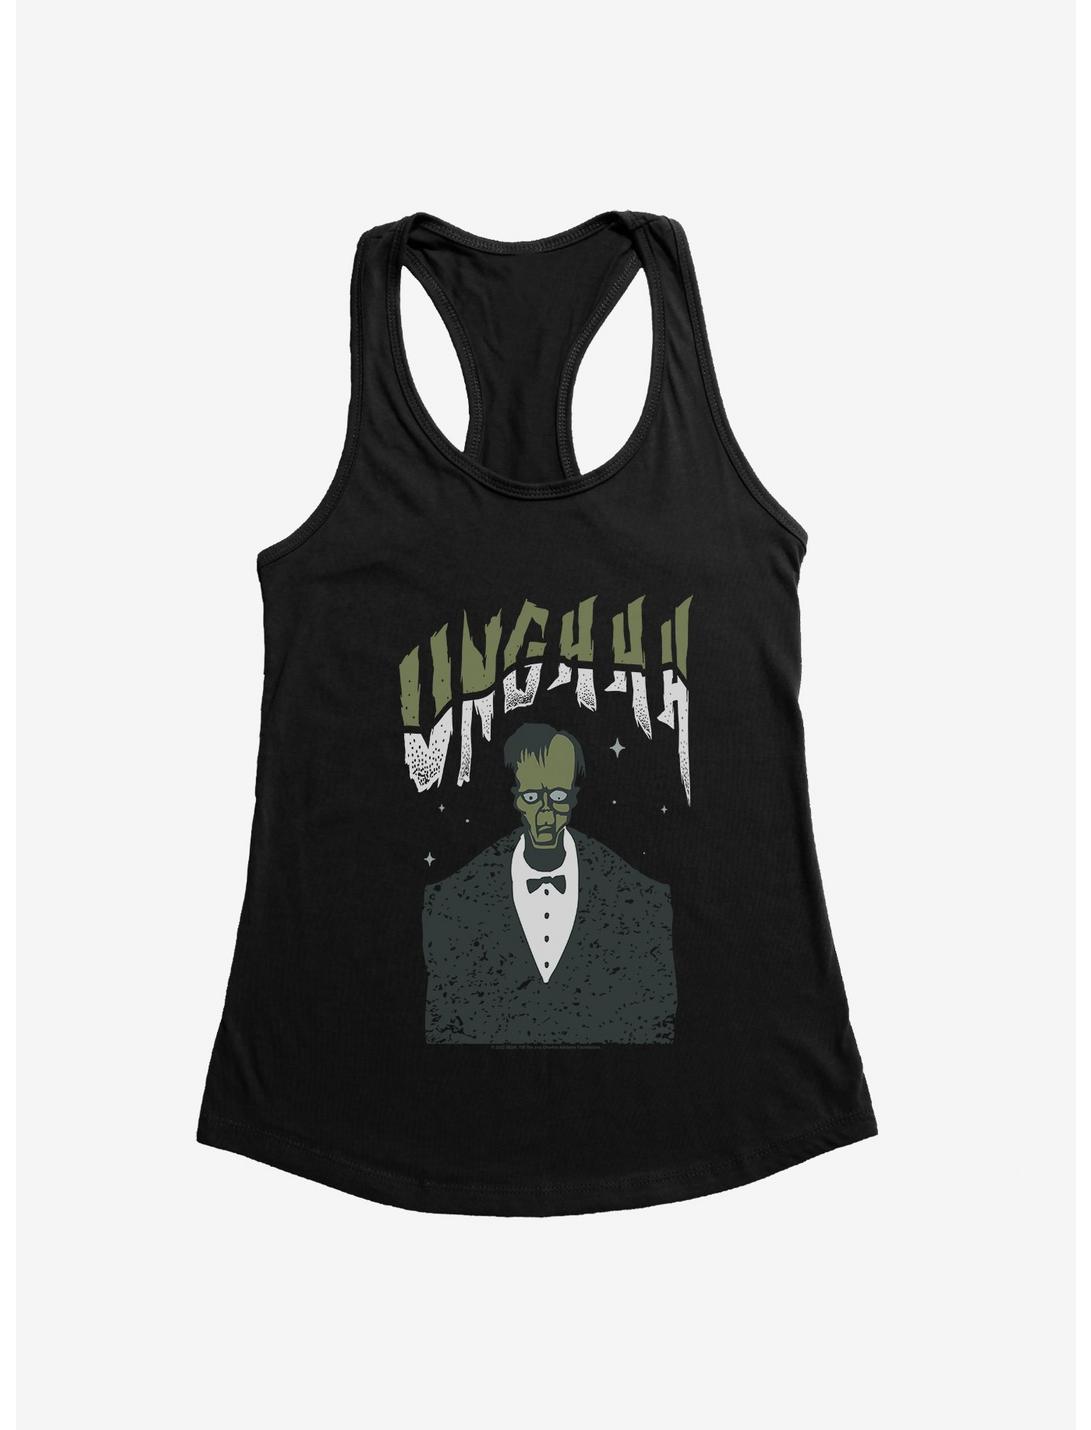 Addams Family Movie Lurch Unghhh Womens Tank Top, BLACK, hi-res